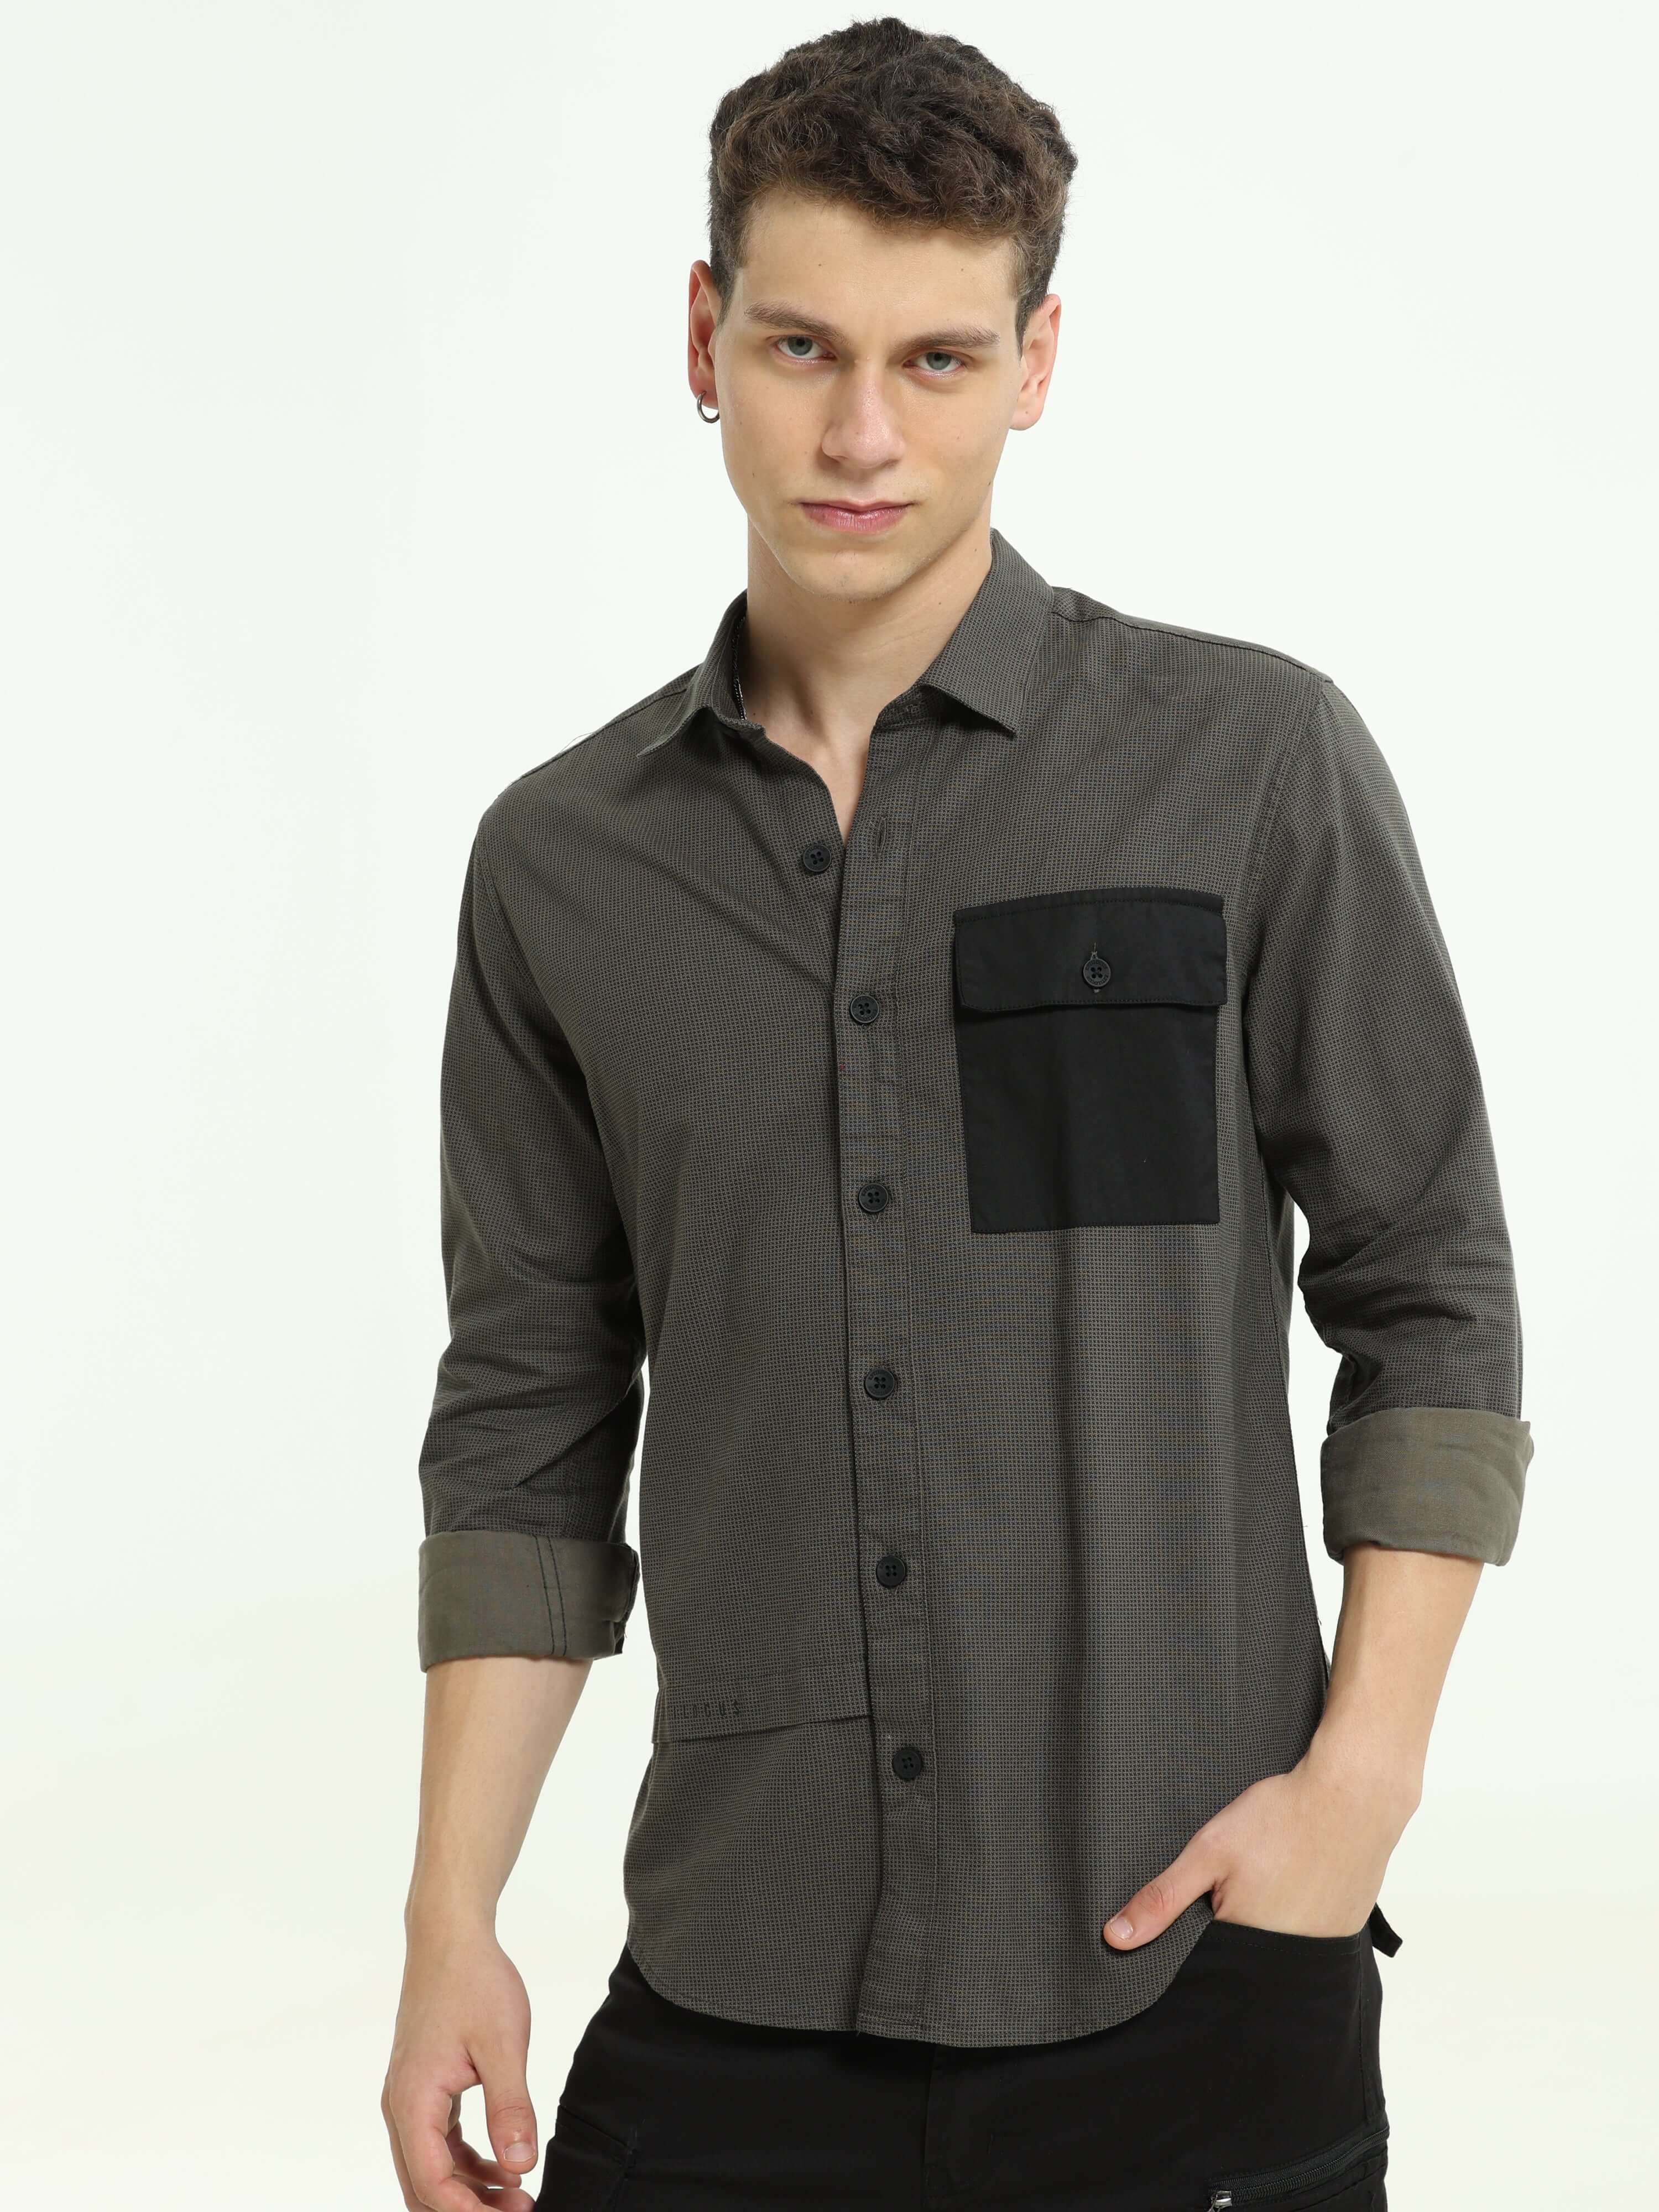 Charcoal contrast patch solid shirt shop online at Estilocus. • Full-sleeve check shirt• Cut and sew placket• Regular collar• Double button square cuff.• Single pocket • Curved hemline• All double-needle construction, finest quality sewing• Machine wash c